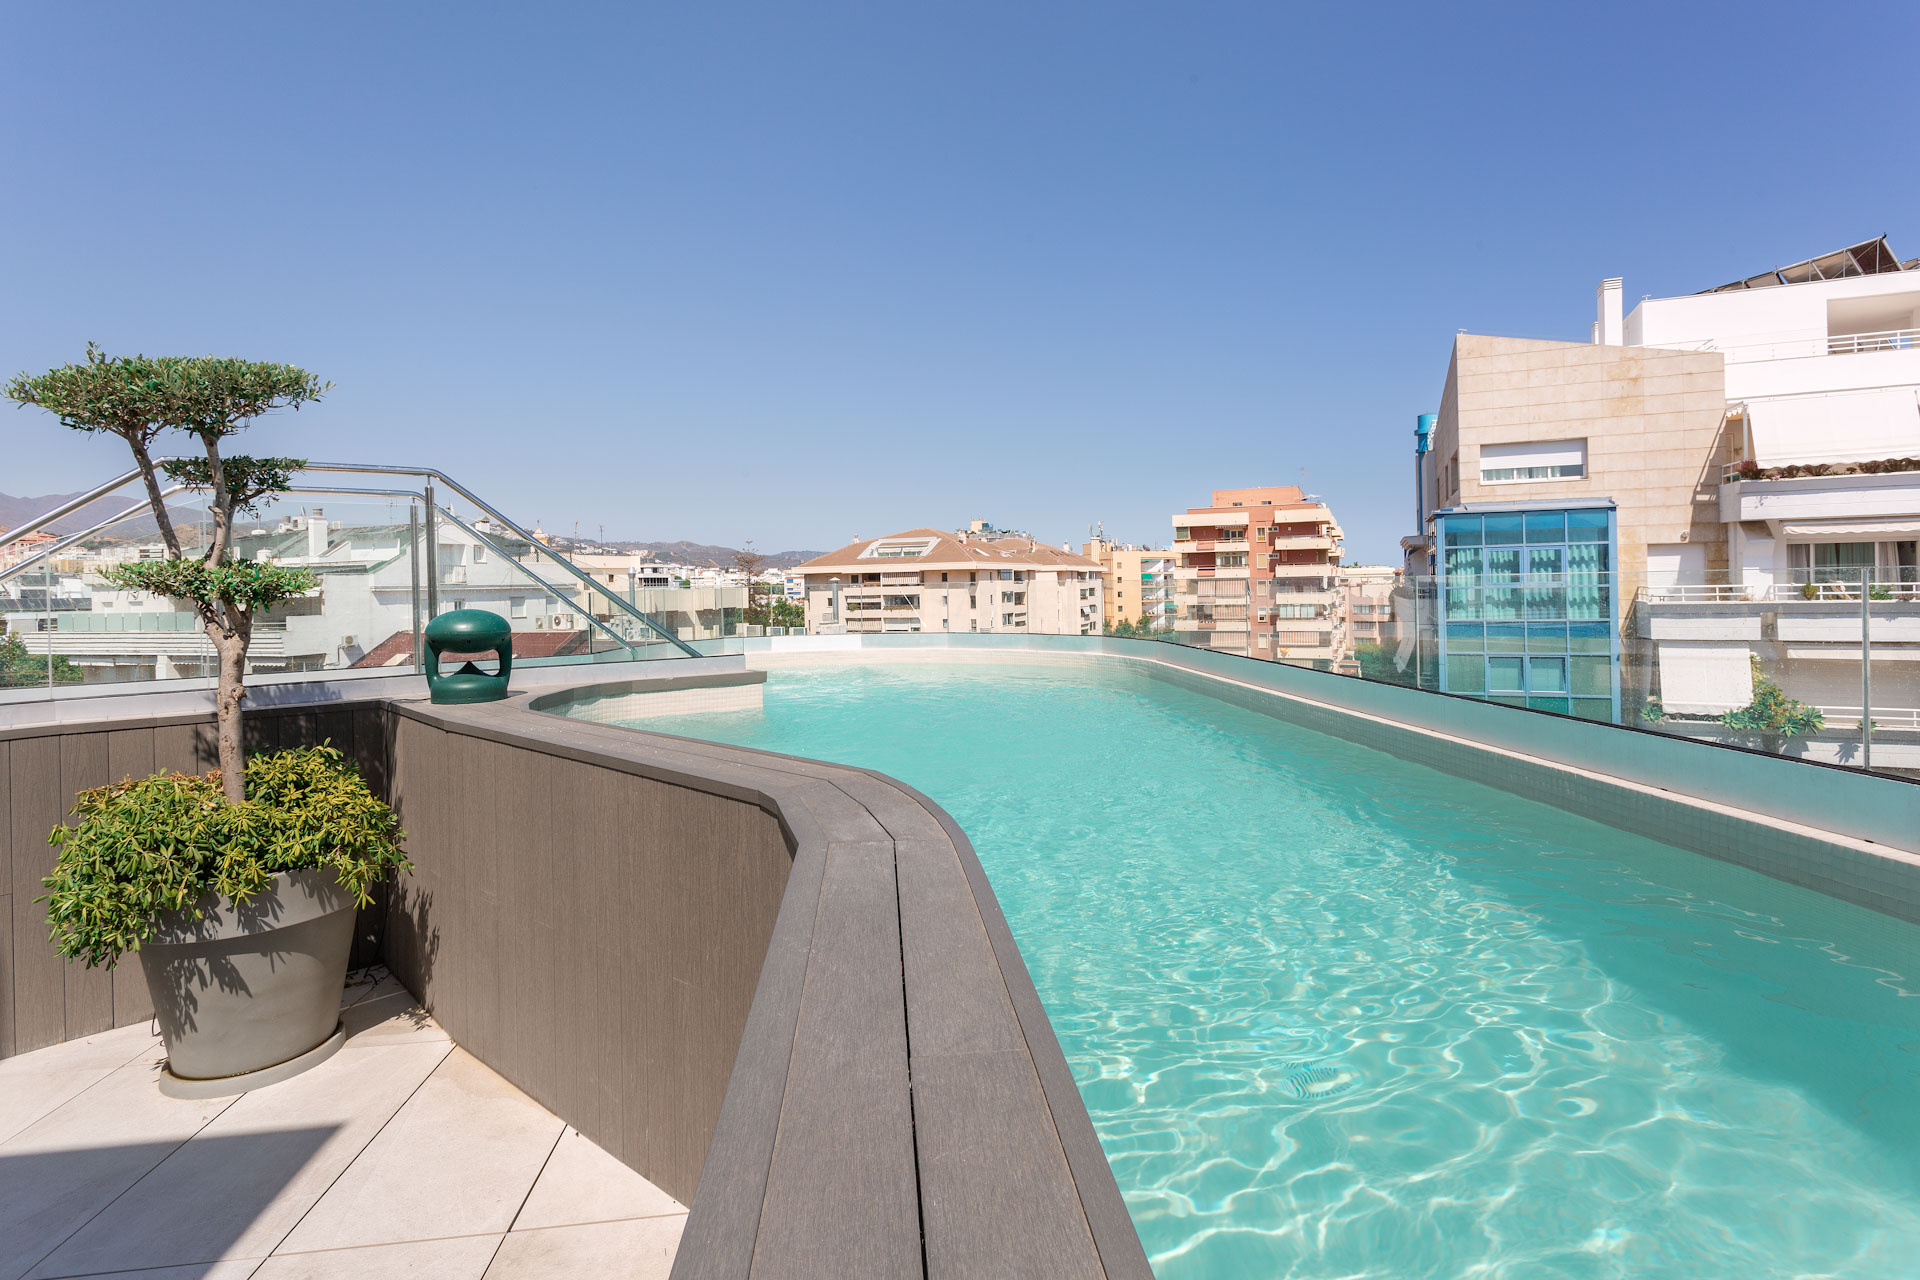 The rooftop swimming pool at Lima Hotel, Marbella, Costa del Sol, Spain. Golf Planet Holidays